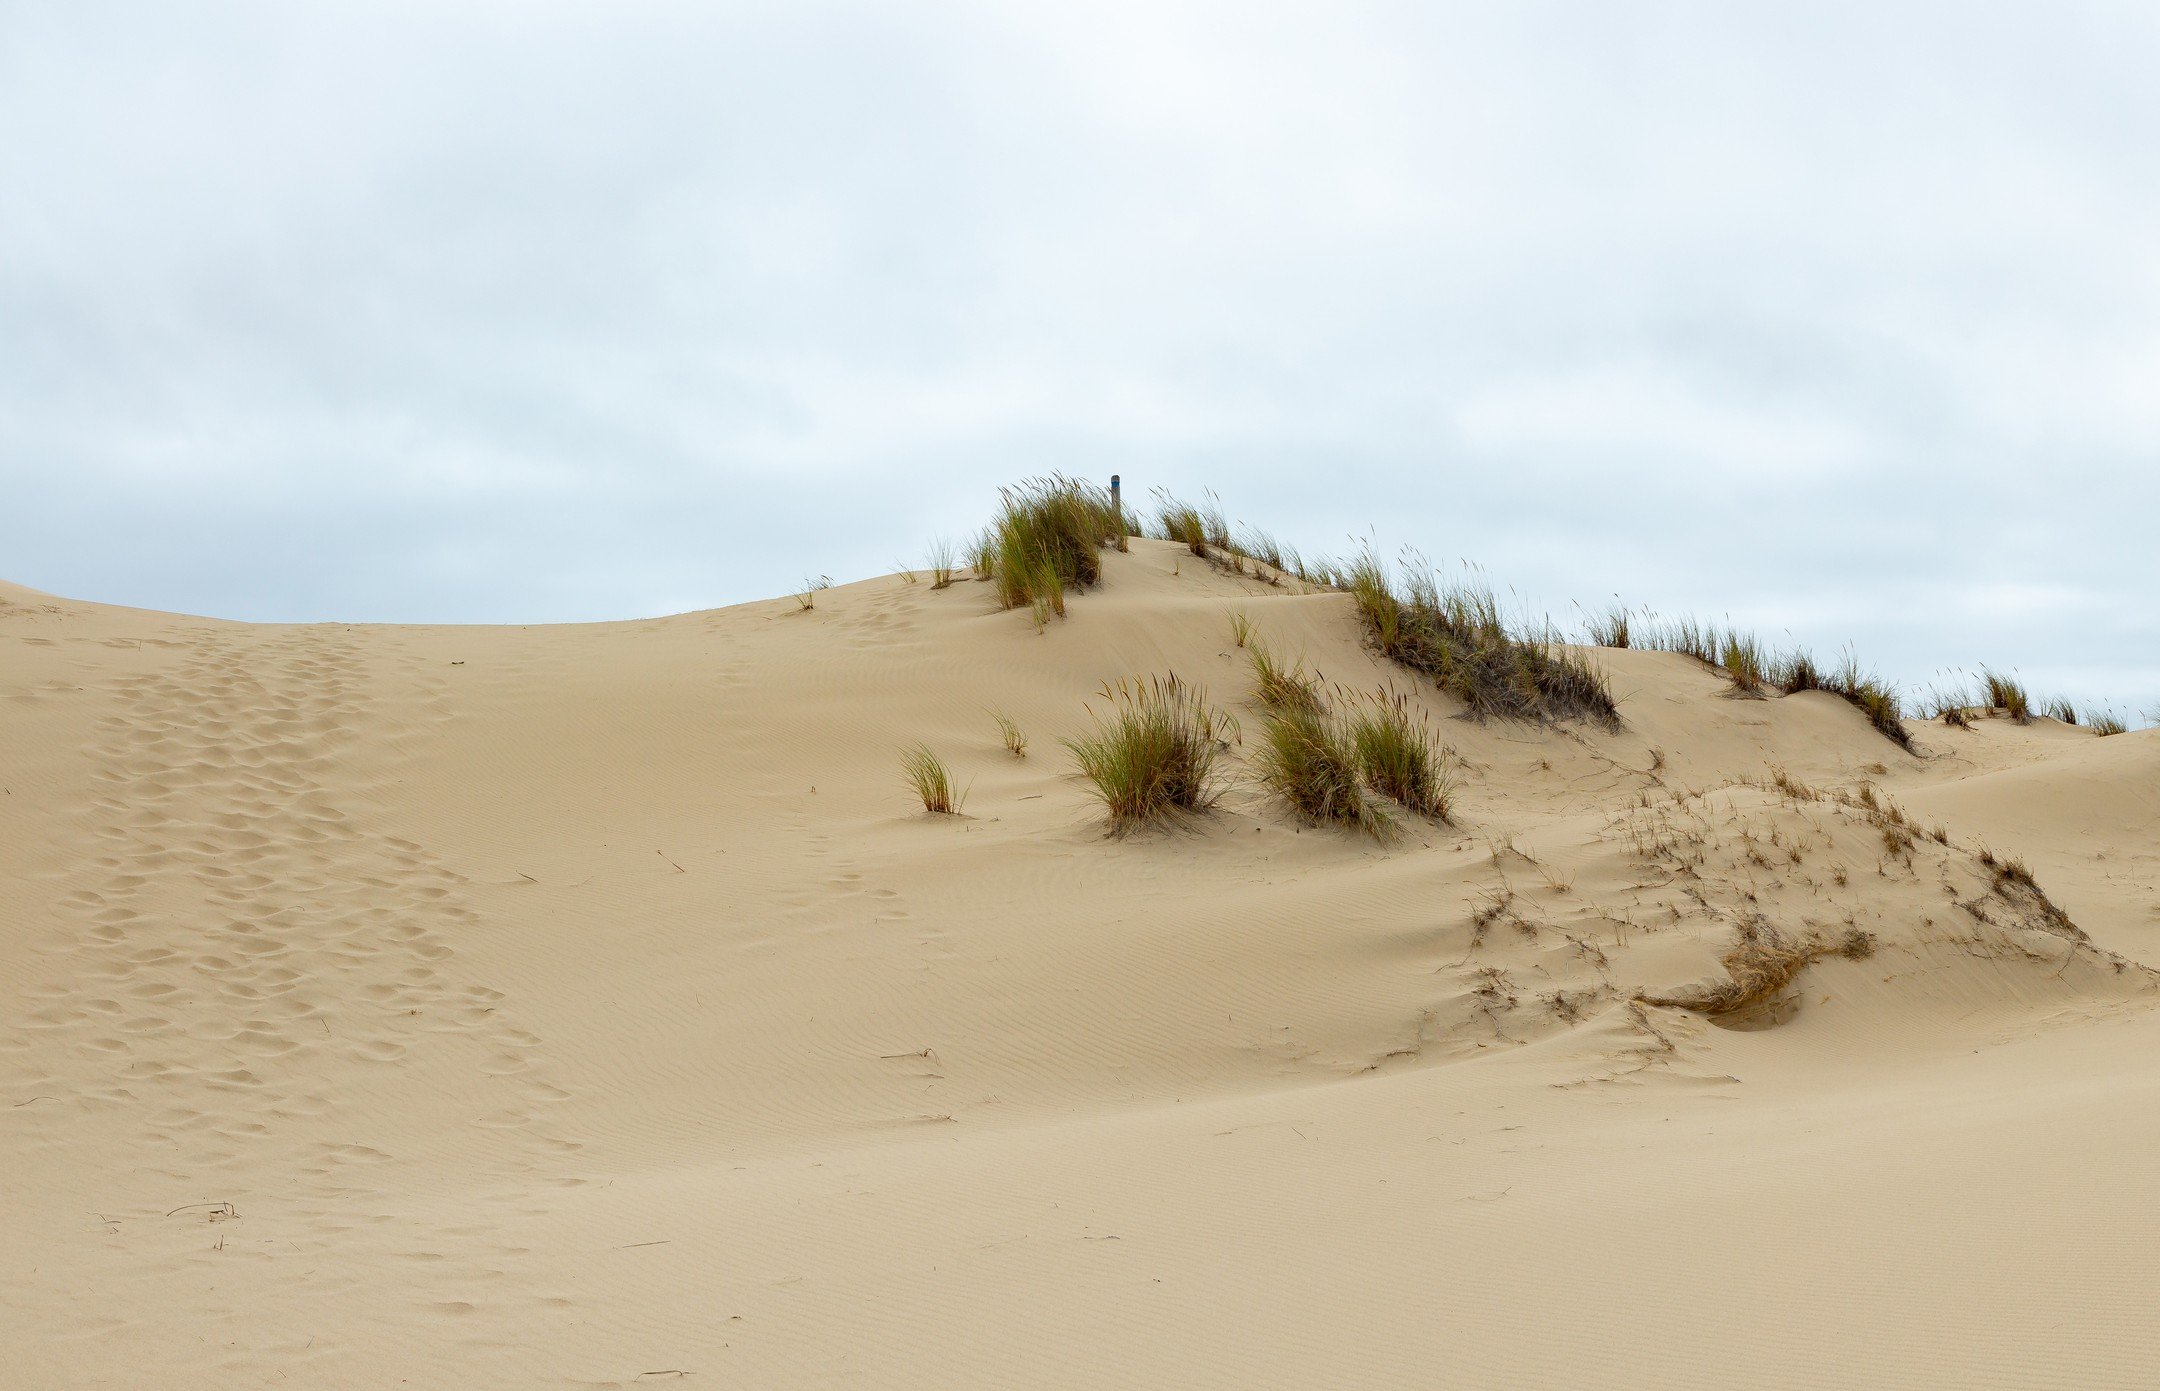 The Oregon Sand Dunes served as one of the inspirations for Frank Herbert's Dune.